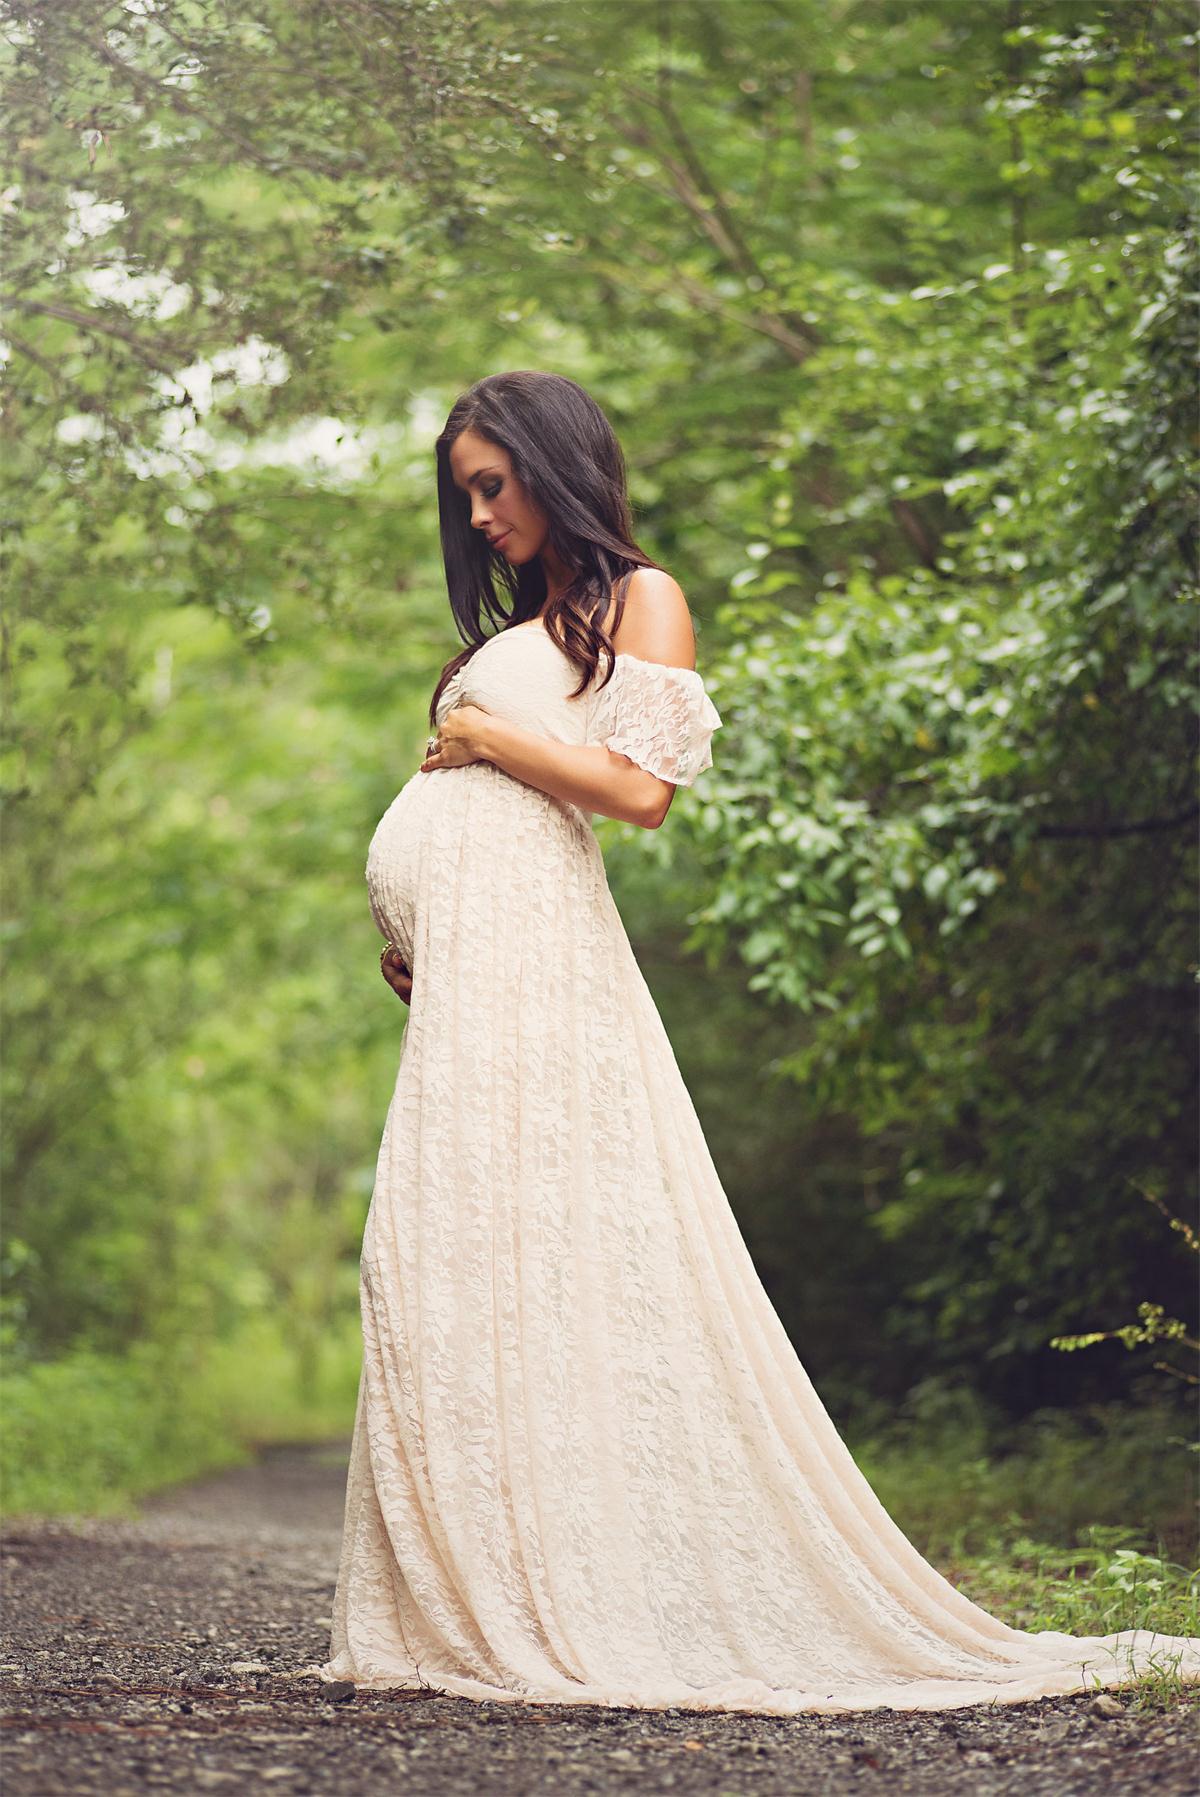 Fox Off the Shoulder Long Pink Lace Maternity Dress for Photography